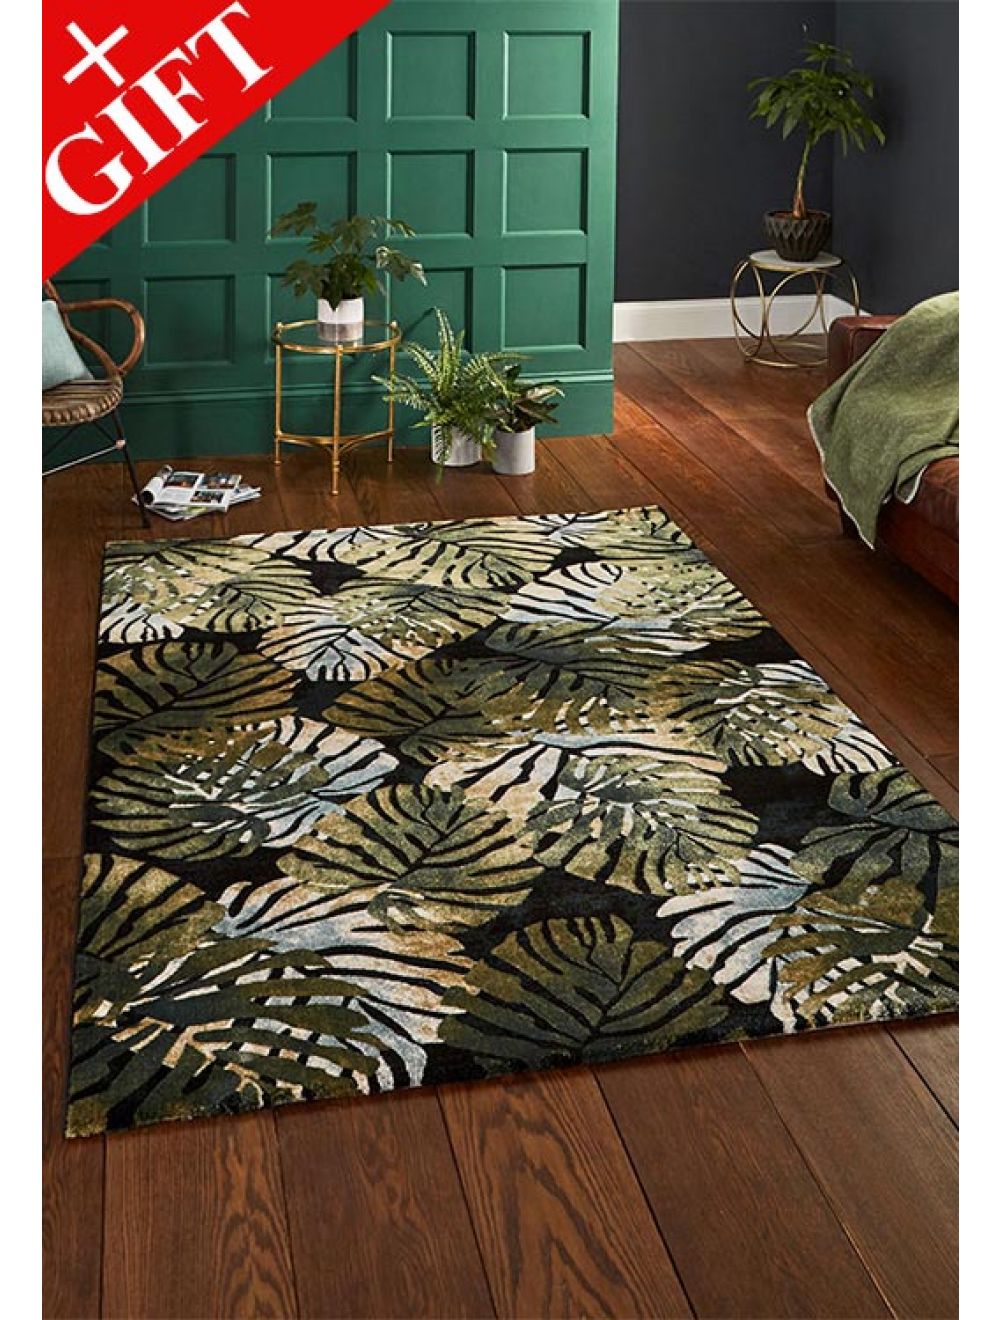 Tropics Rugs 6097 In Black And Green, Green And Brown Rugs Uk